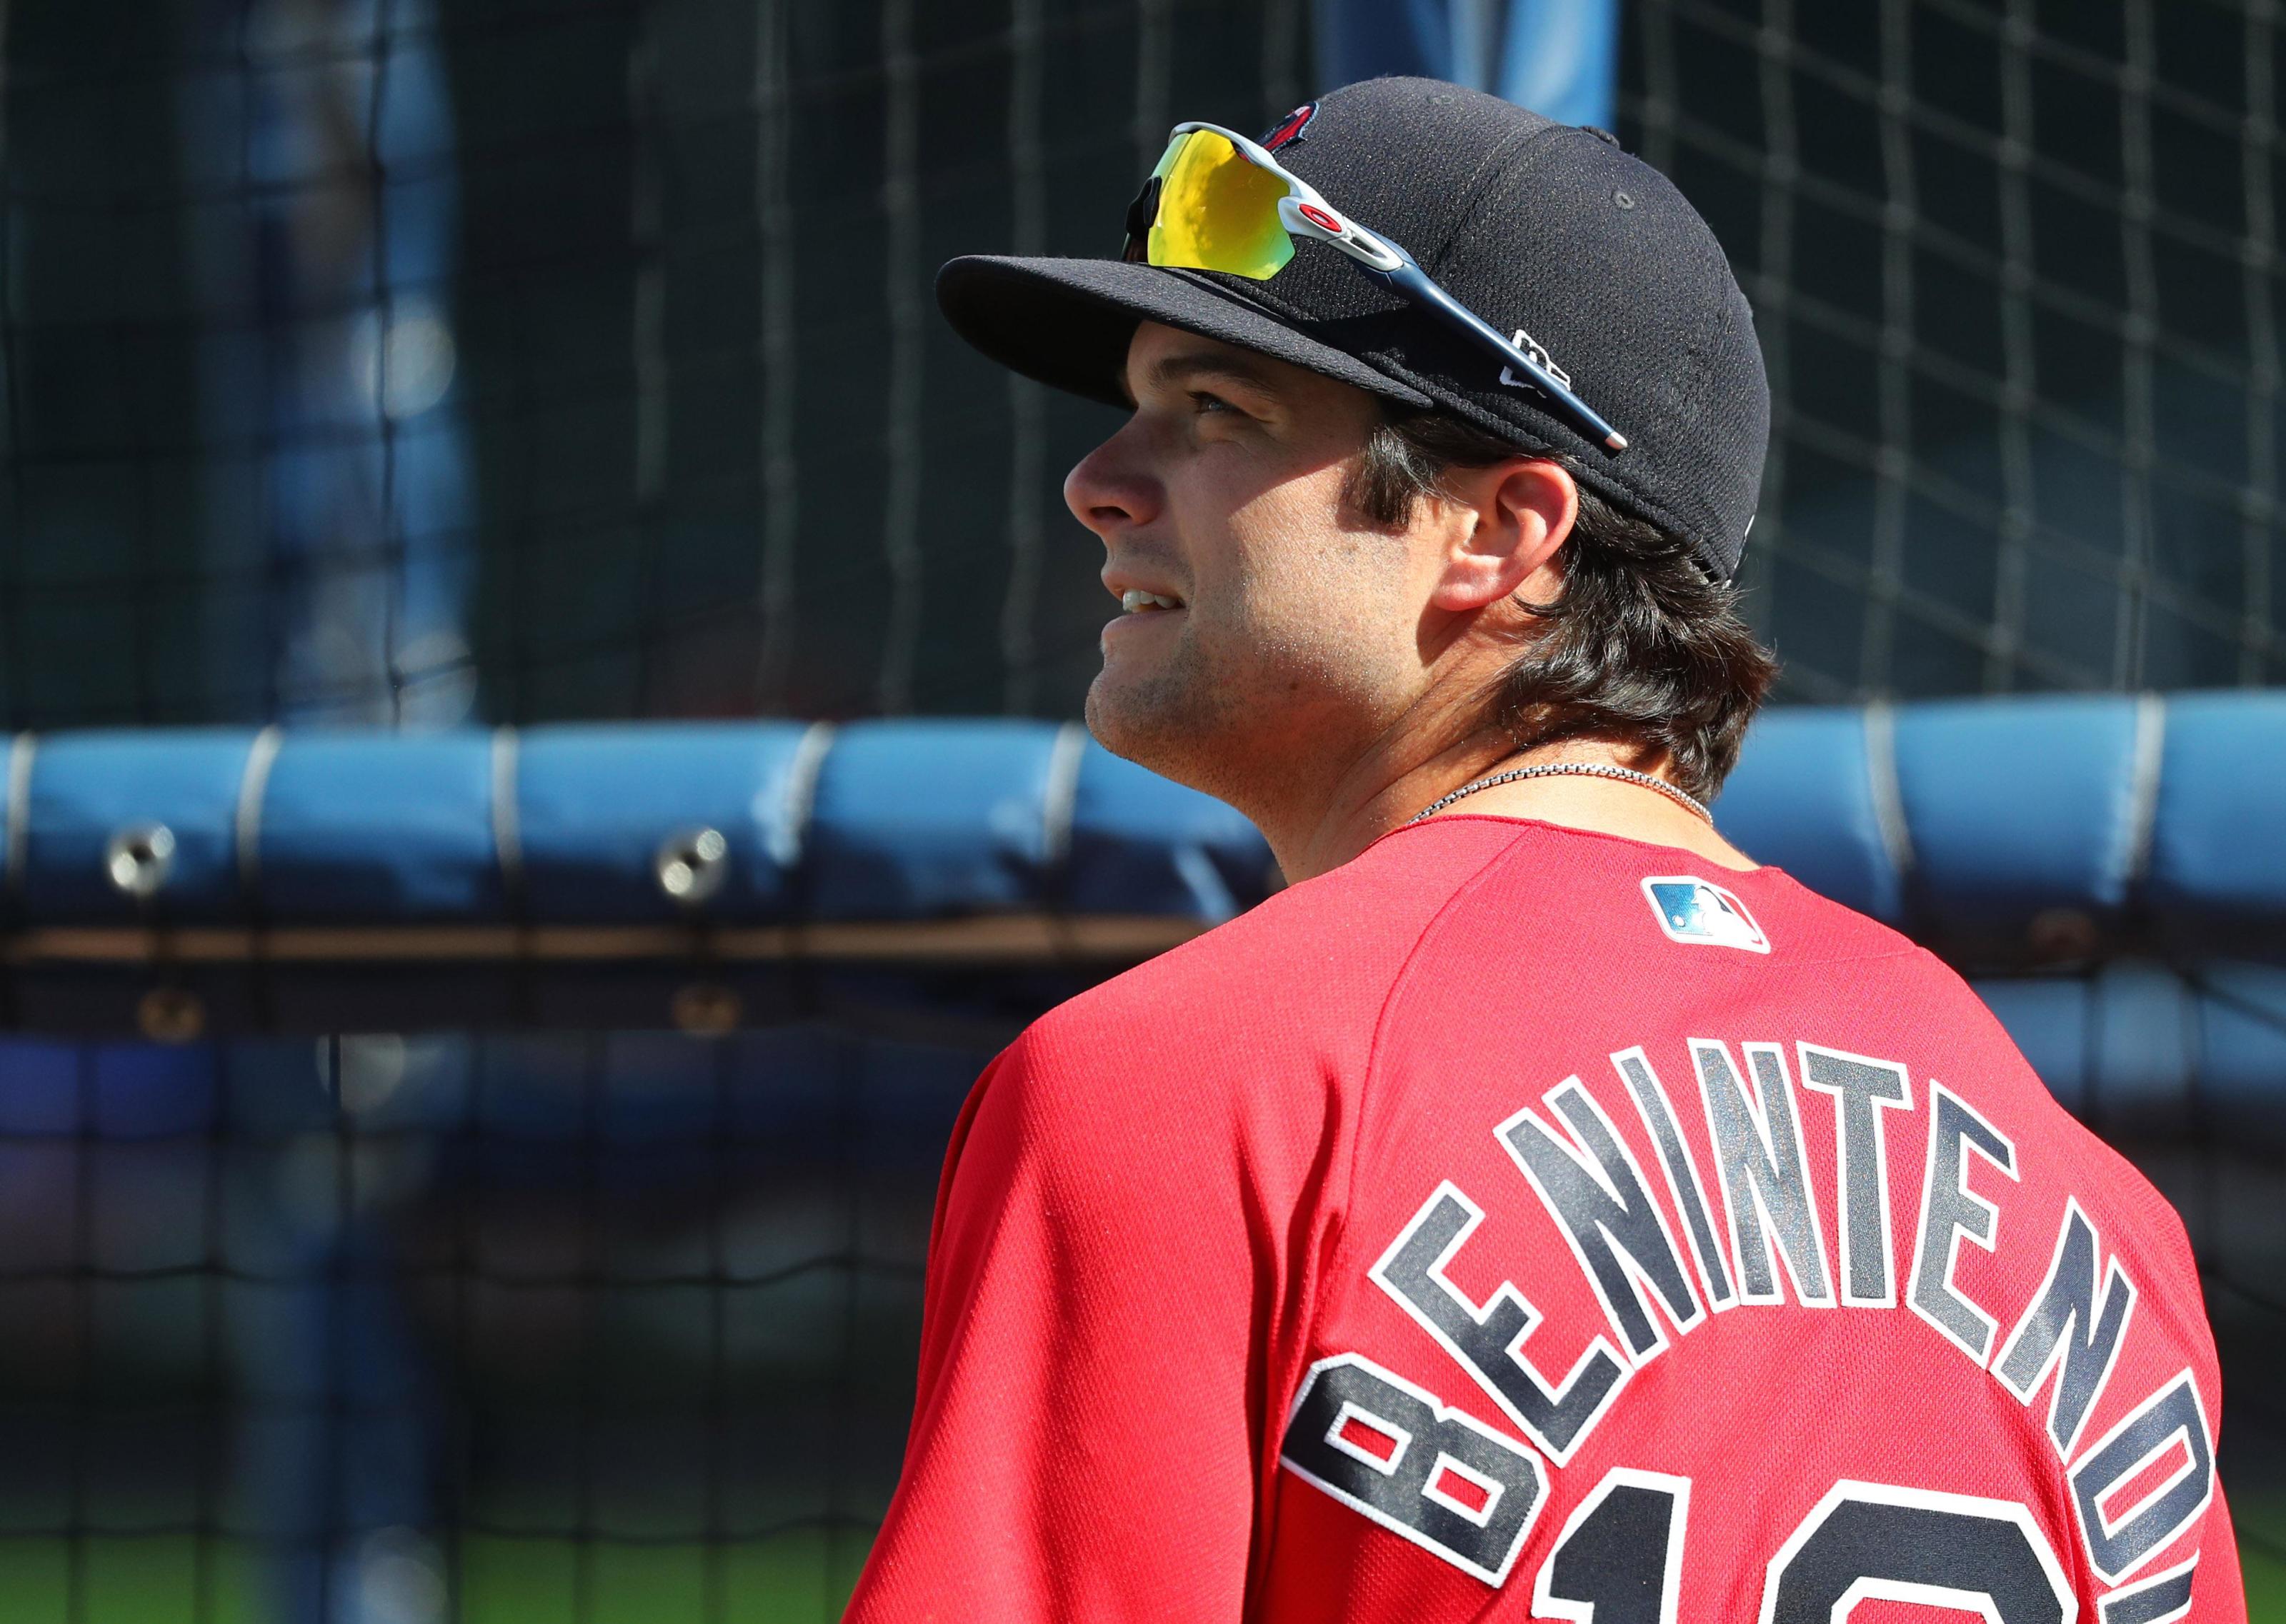 Andrew Benintendi will have a new look in 2018 thanks to a trip to